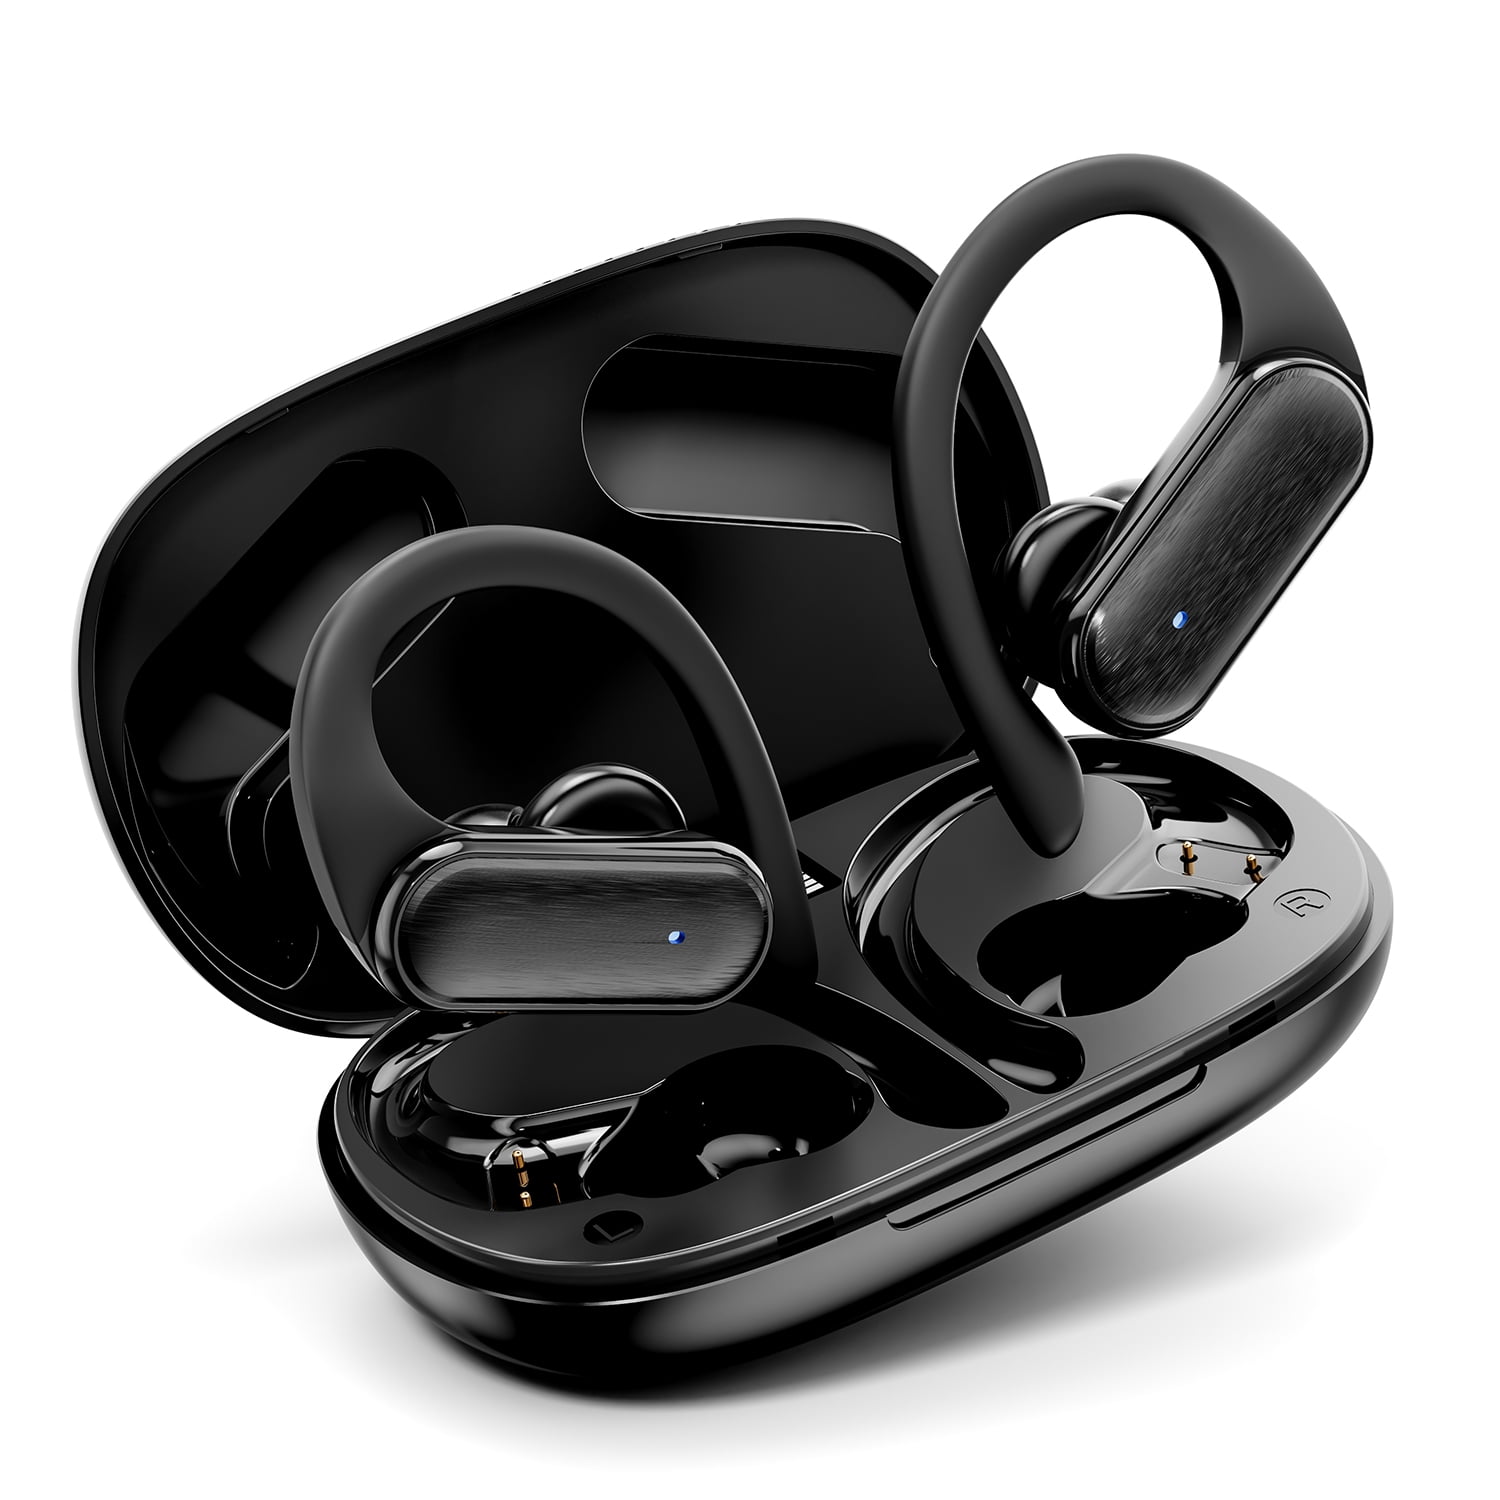 Wireless Earbuds Bluetooth 5.3 Headphones TWS Stereo Bass in-Ear Earphones  with IP5 Waterproof Built-in Mic Headset for Sport, 35Hours Playing Time